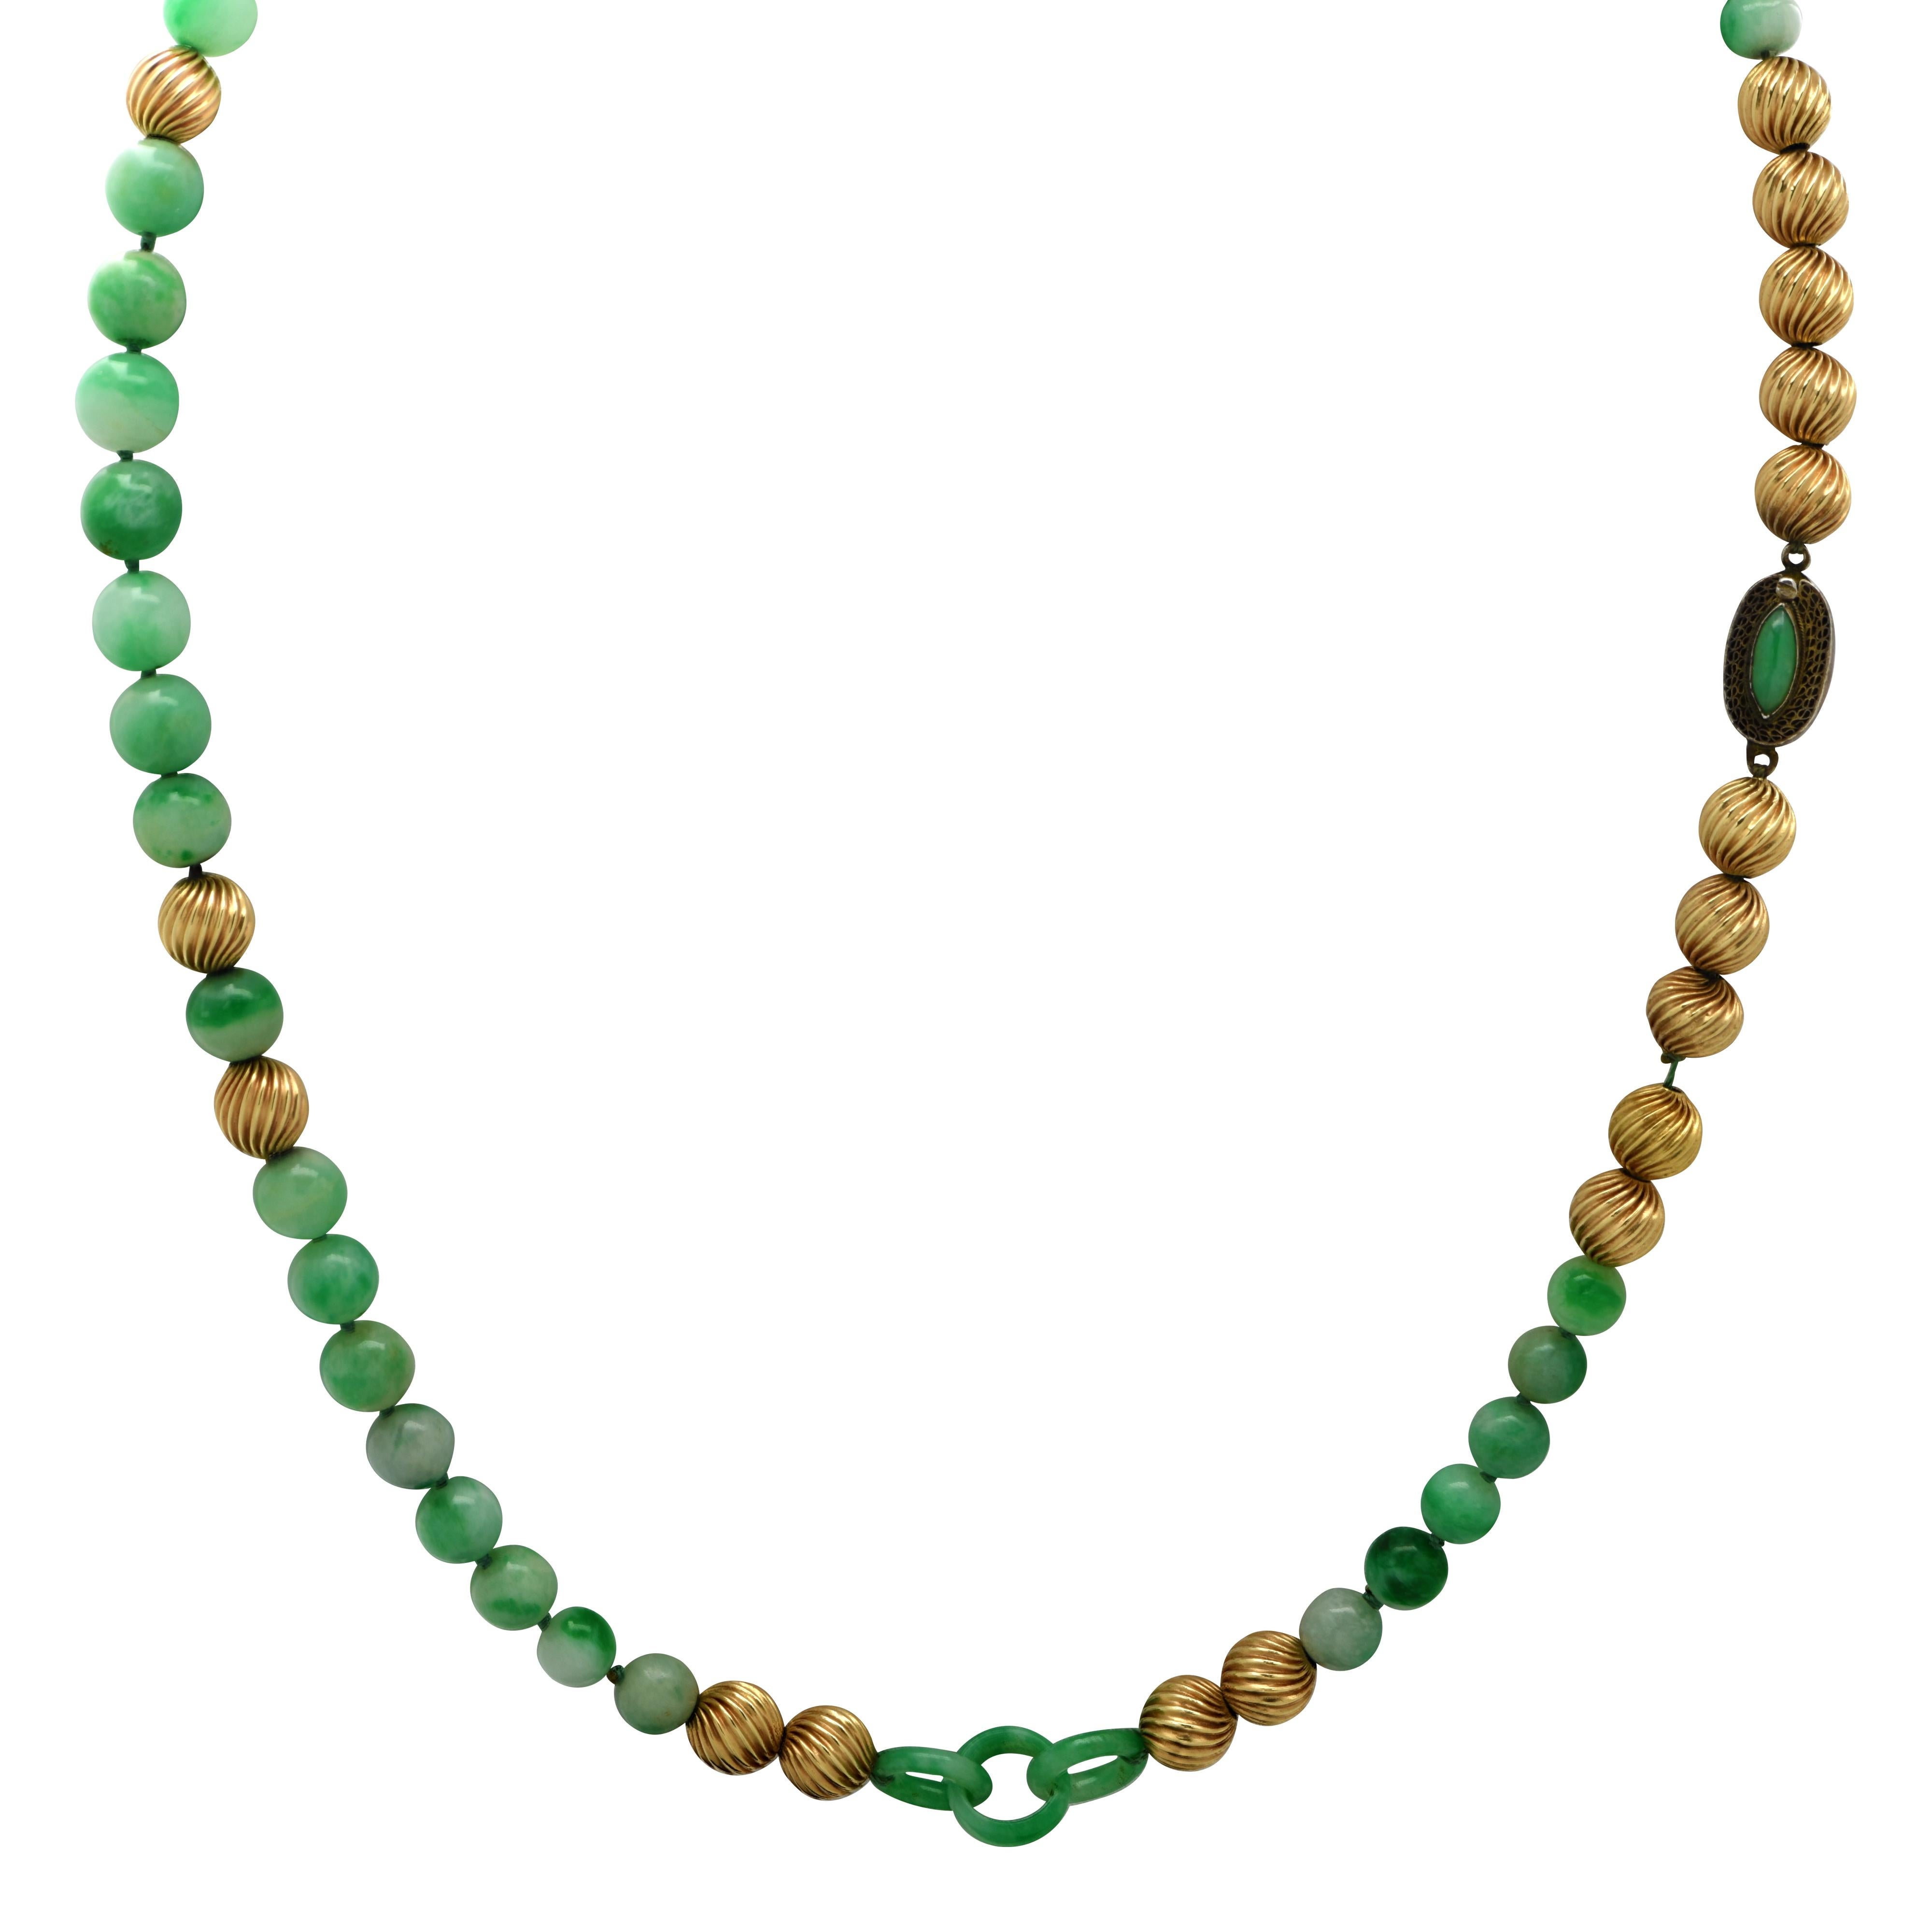 Gorgeous Jadeite Bead necklace featuring 37 jadeite beads, graduating in size from 3mm to 4mm, interspersed with 22 yellow gold fluted beads and interlocking jade rings, with a silver hidden box clasp set with a marquise shape jade cabochon. This